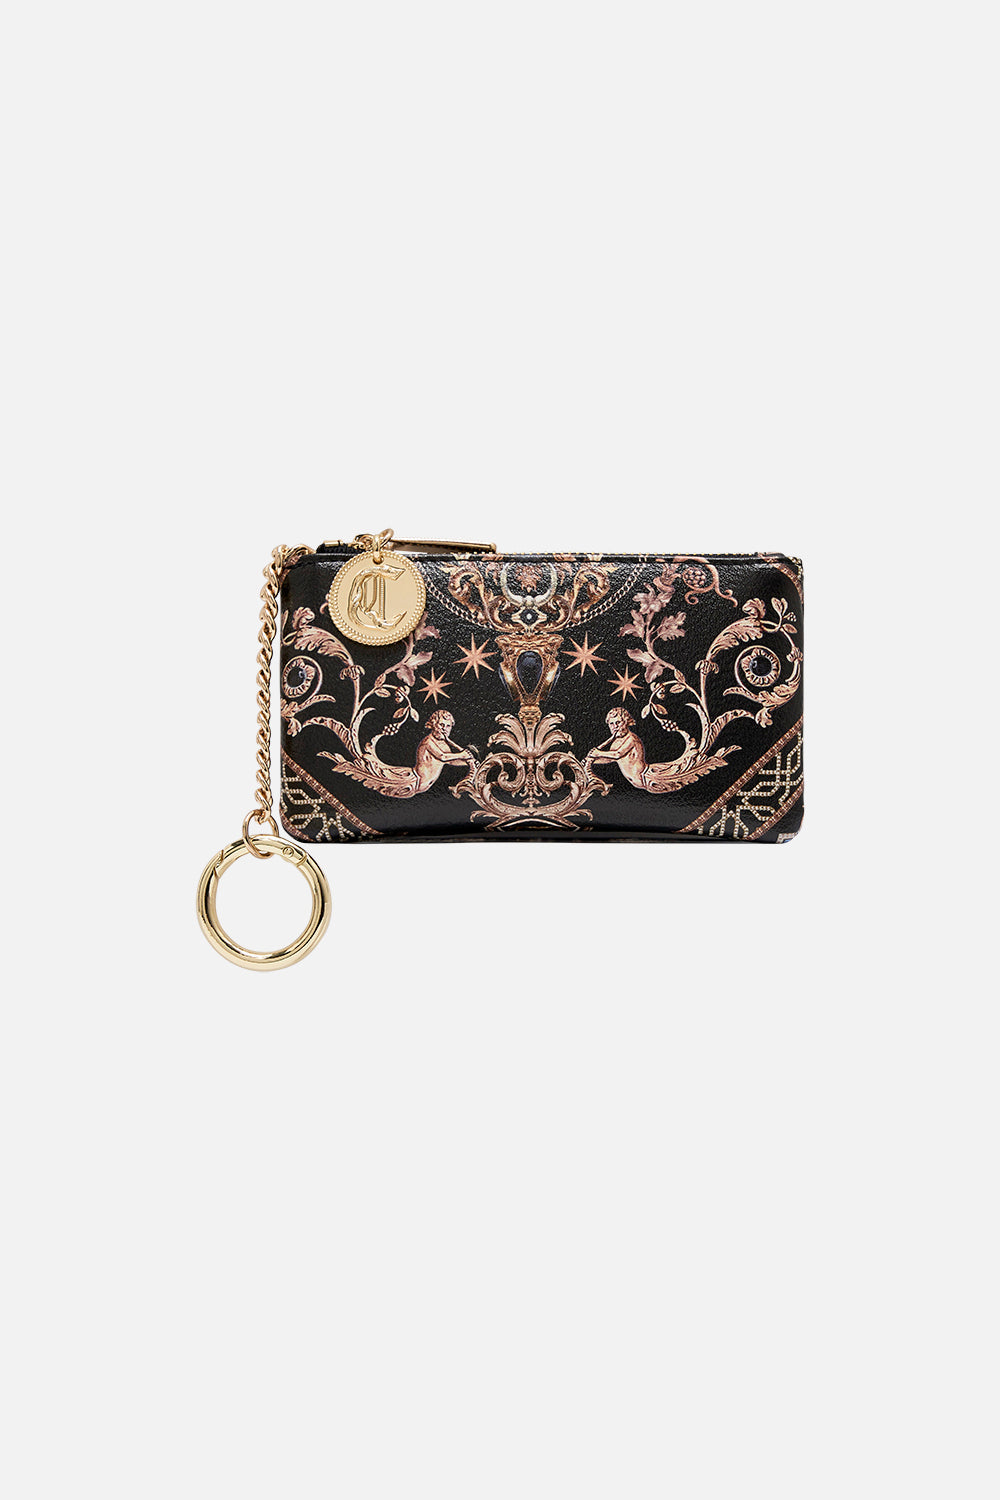 Product view of CAMILLA printed cardholder pouch in Duomo Dynasty